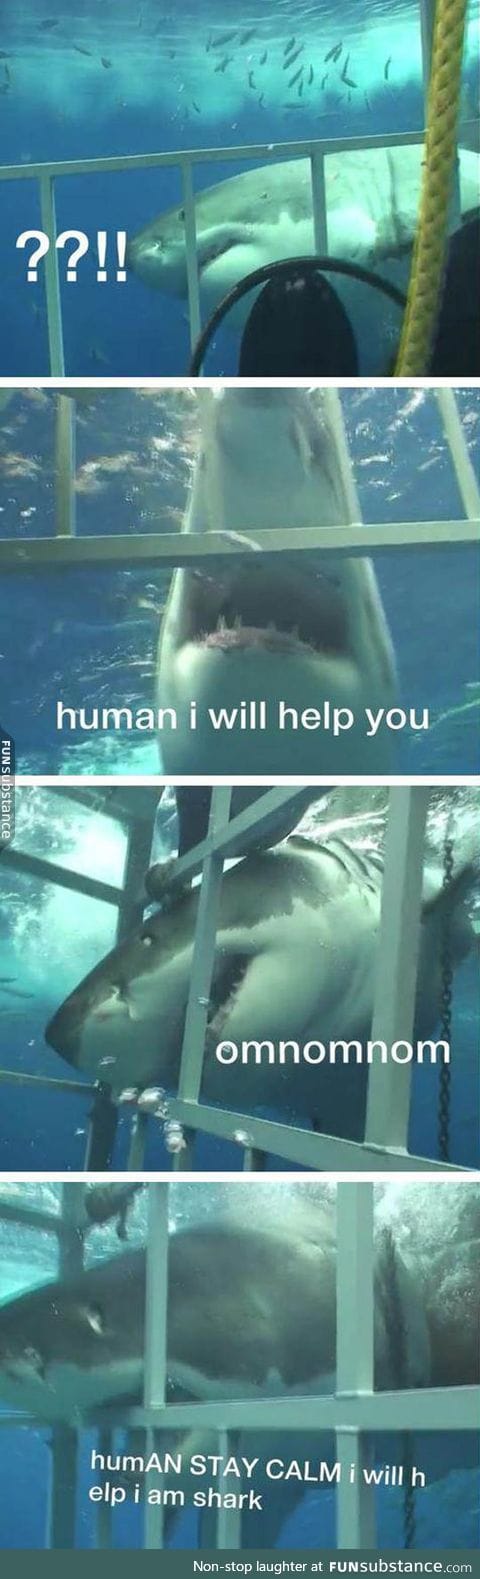 Sharks are not so bad after all